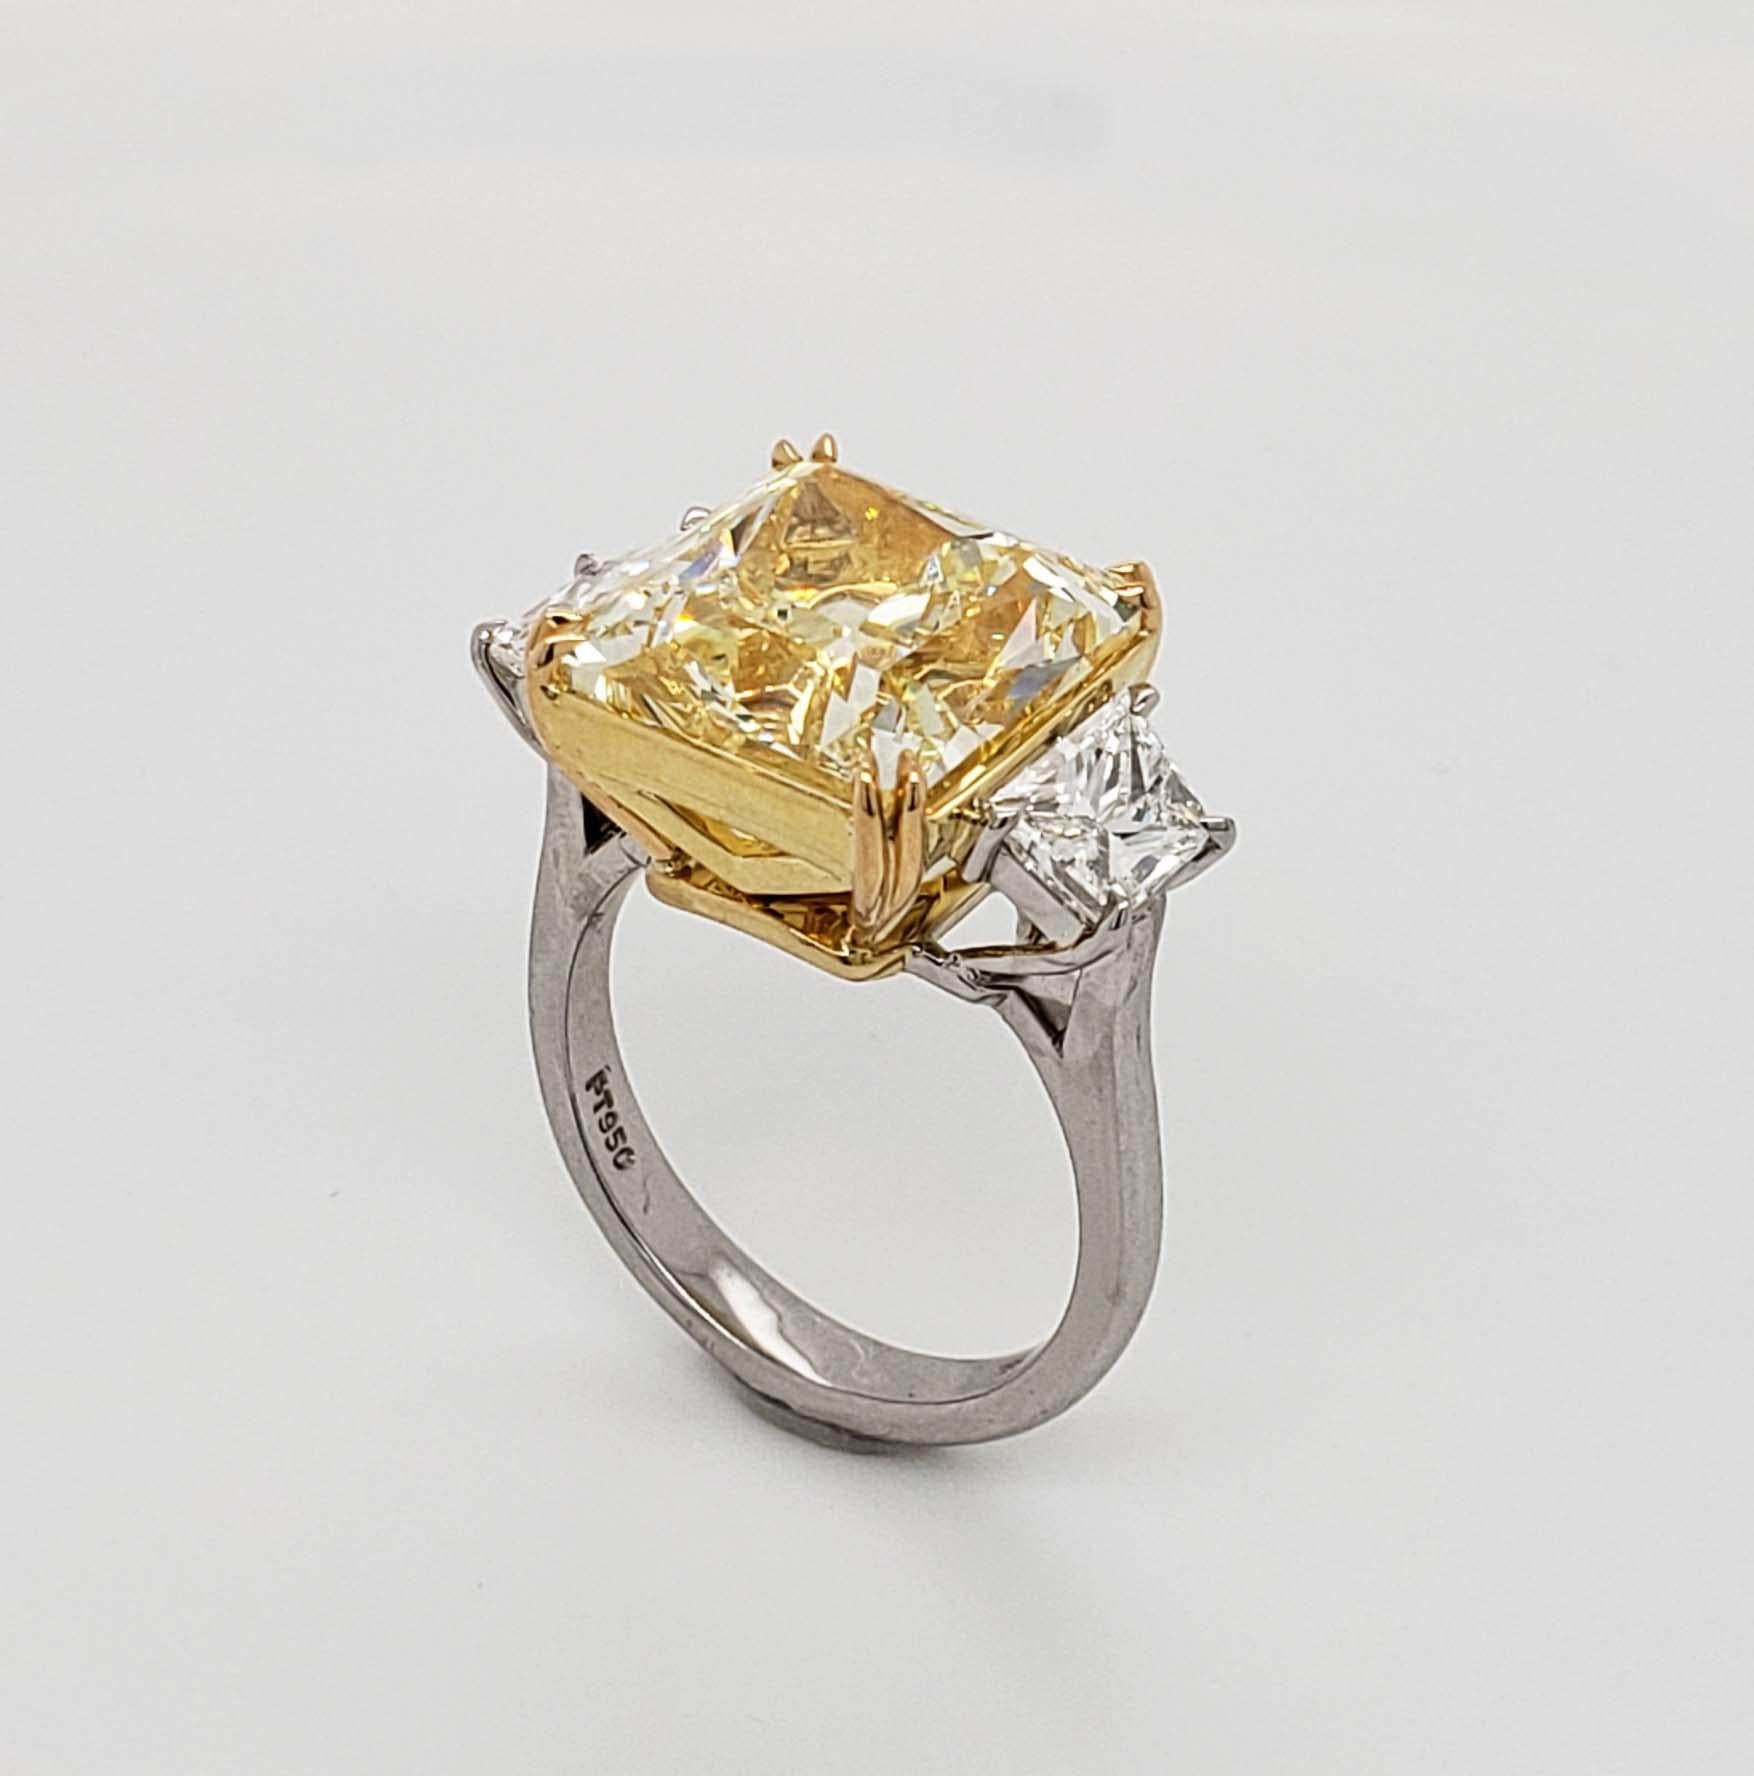 Radiant Cut Scarselli 11 Carat Fancy Yellow Radiant Diamond Ring in Platinum 'GIA' For Sale